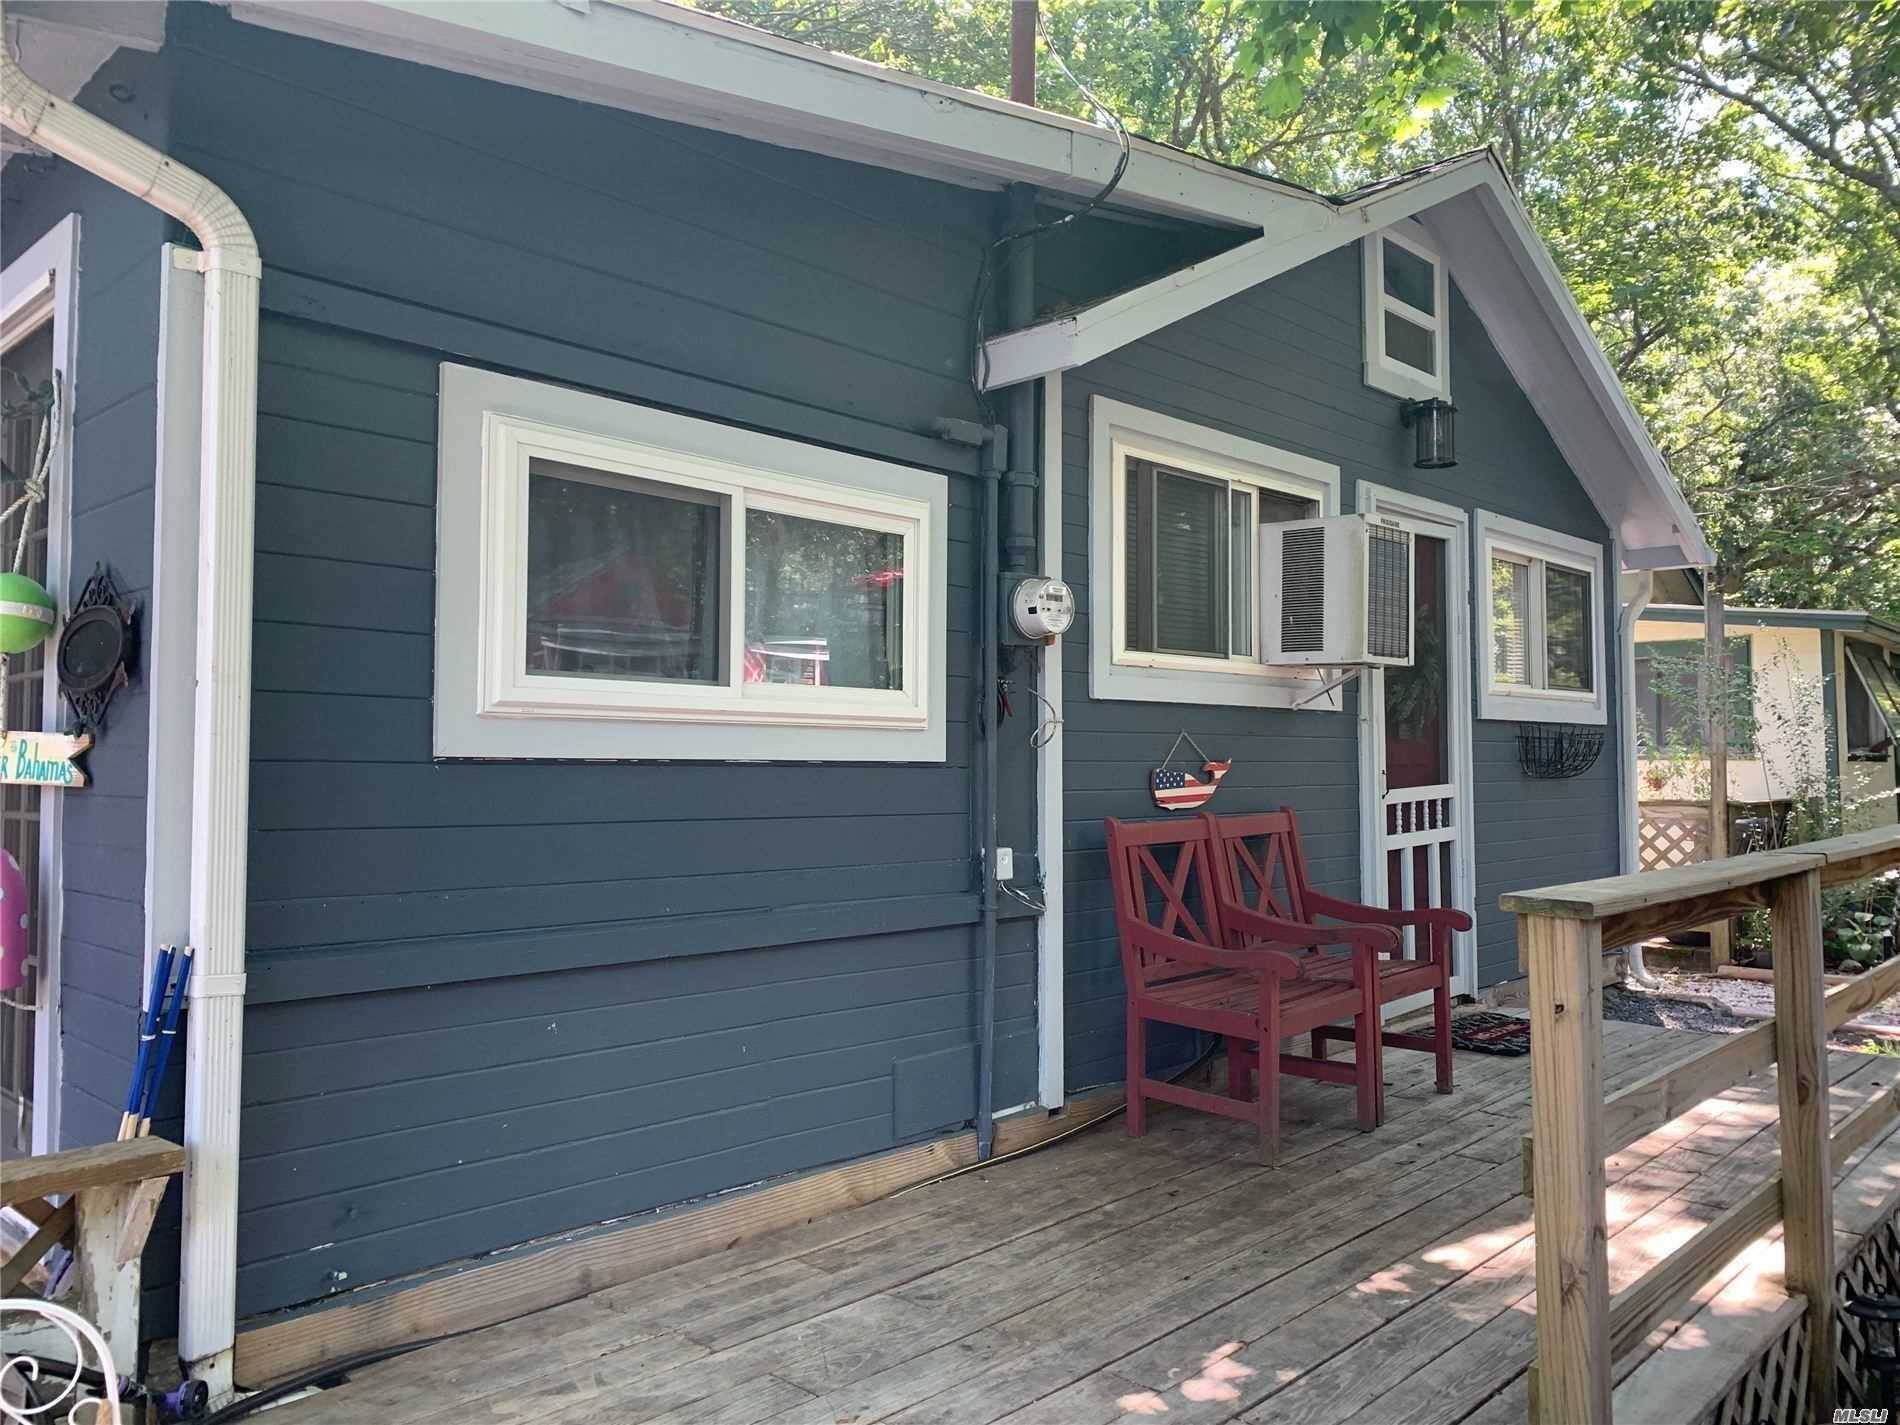 RENOVATED 2 Bedroom Cottage with Nothing left to do but bring your beach towels and Enjoy !